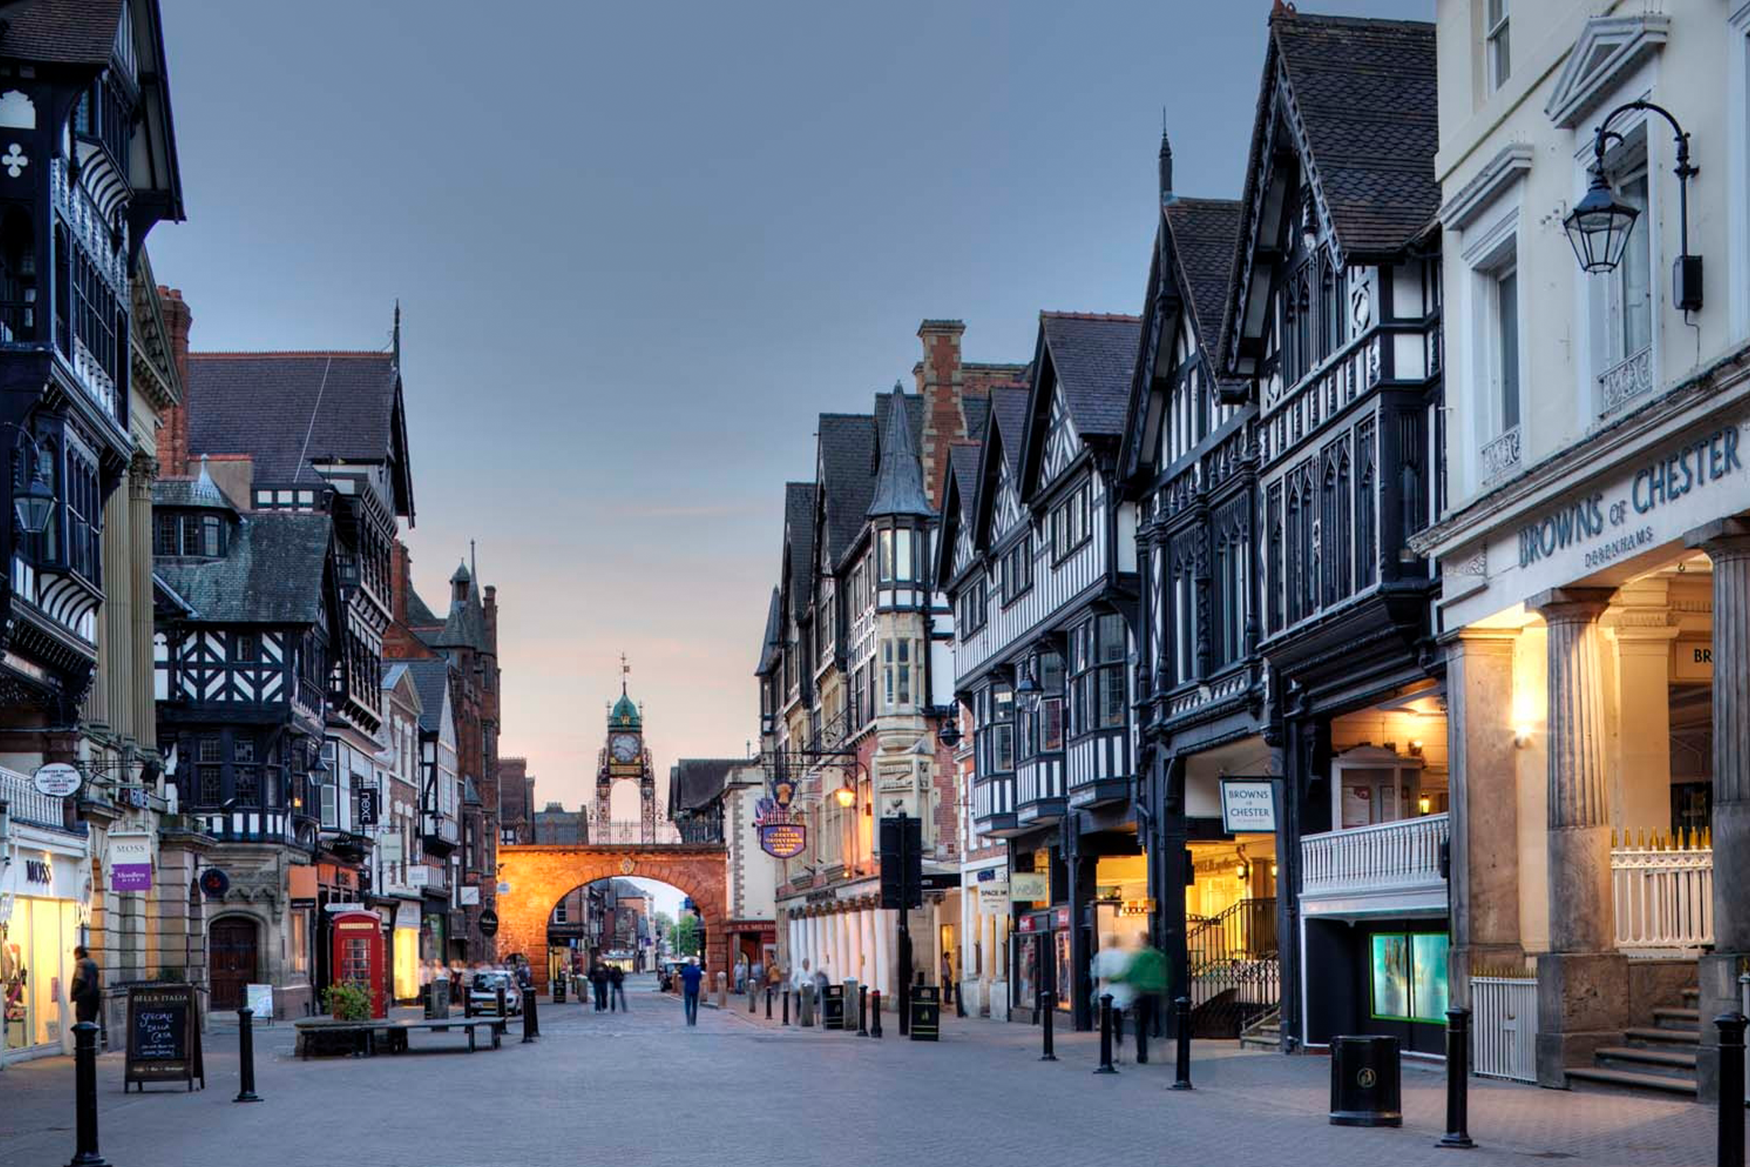 SEO services in Chester, England Cracking the PM interview